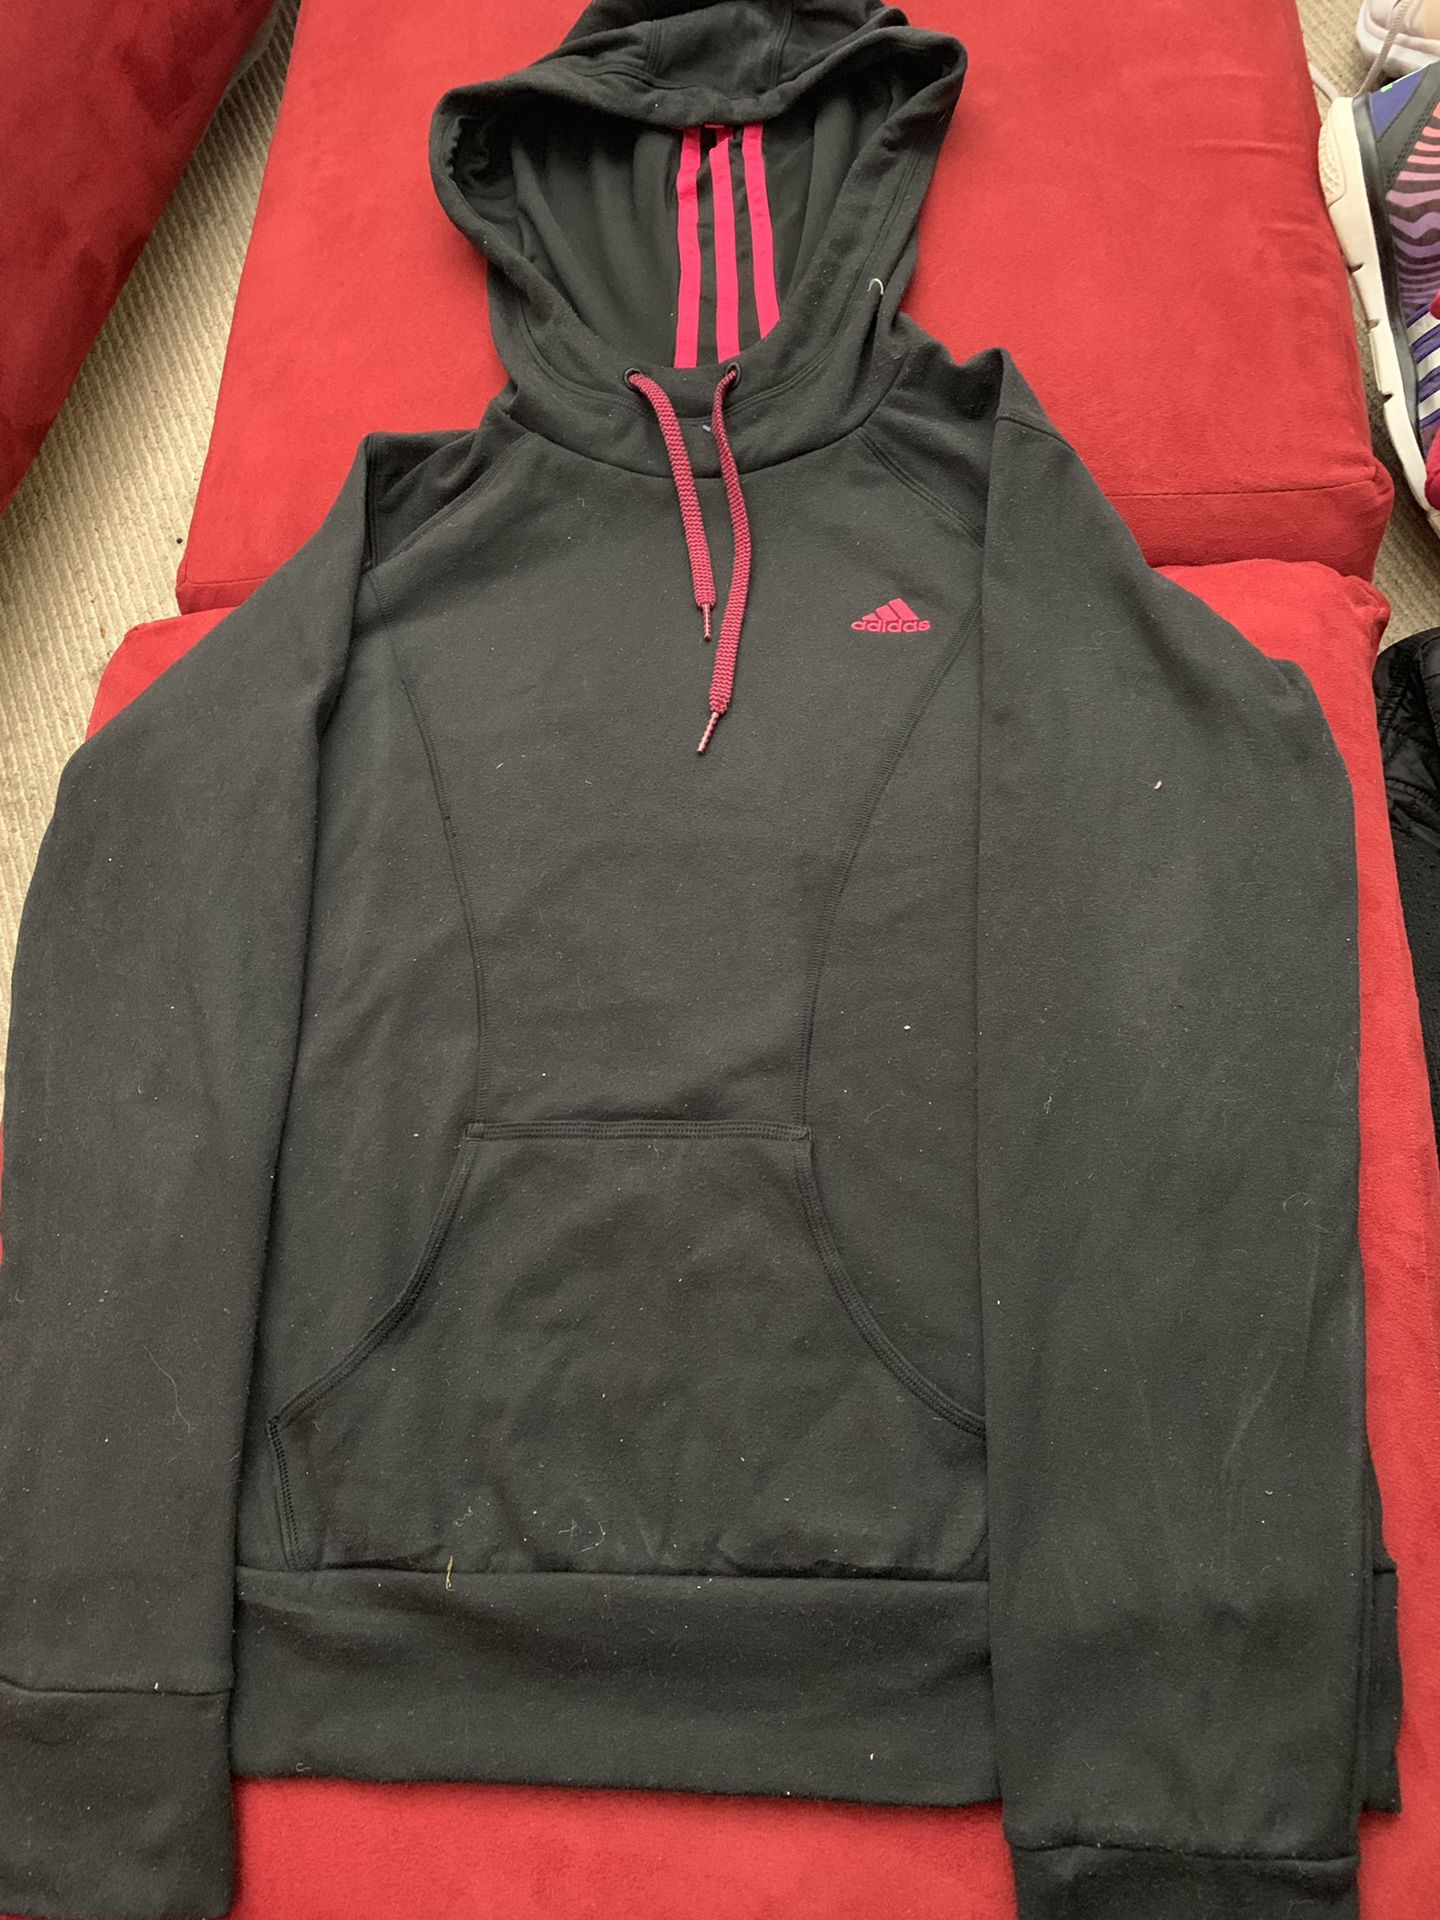 Adidas hoodie......for performance